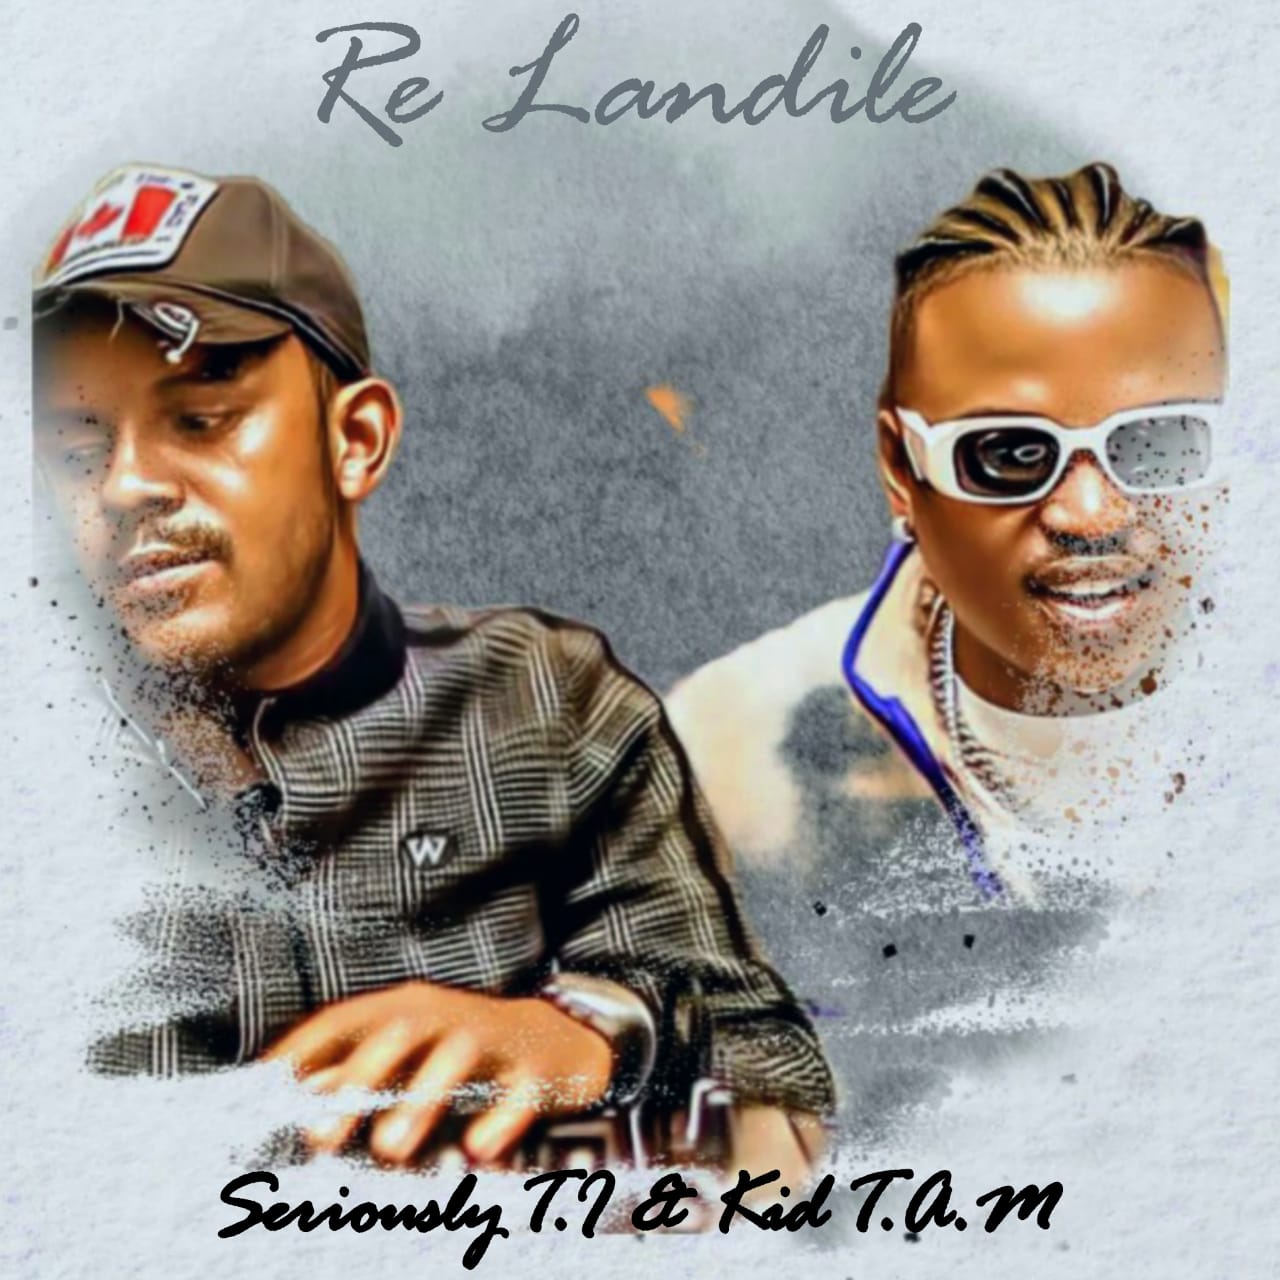 RE LENDILE - SERIOUSLY T.I & KID T.A.M